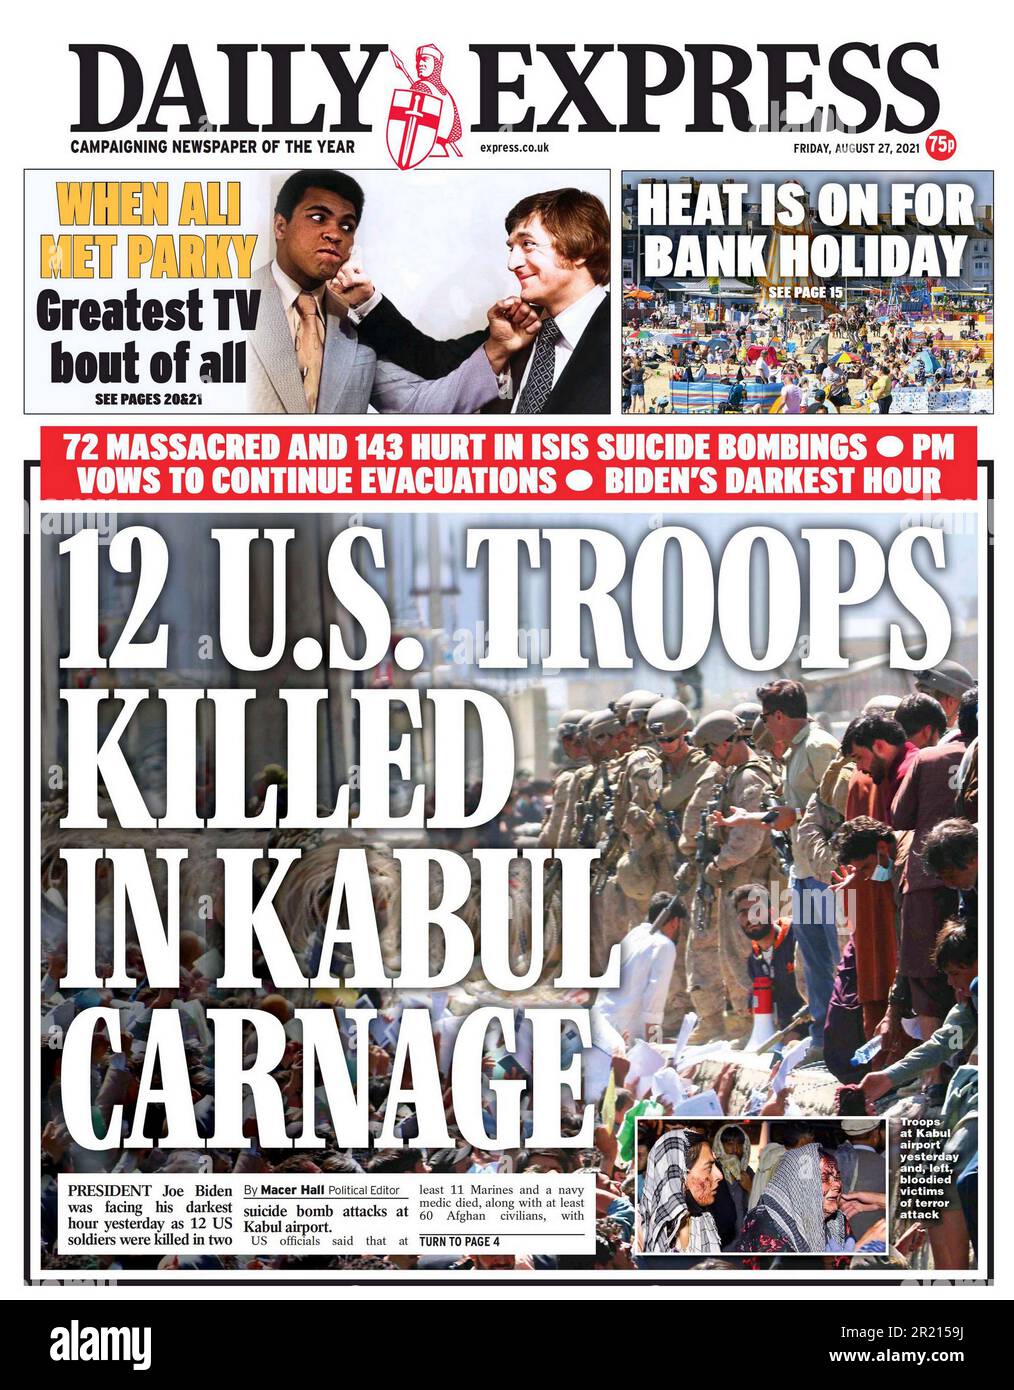 Daily Express newspaper Headline (British), Evacuation from Afghanistan. 27th august 2021. Large-scale evacuations of foreign citizens and some vulnerable Afghan citizens took place amid the withdrawal of US and NATO forces at the end of the 2001-2021 war in Afghanistan. The Taliban took control of Kabul and declared victory on 15 August 2021, and the NATO-backed Islamic Republic of Afghanistan collapsed. With the Taliban controlling the whole city except Hamid Karzai International Airport, Stock Photo